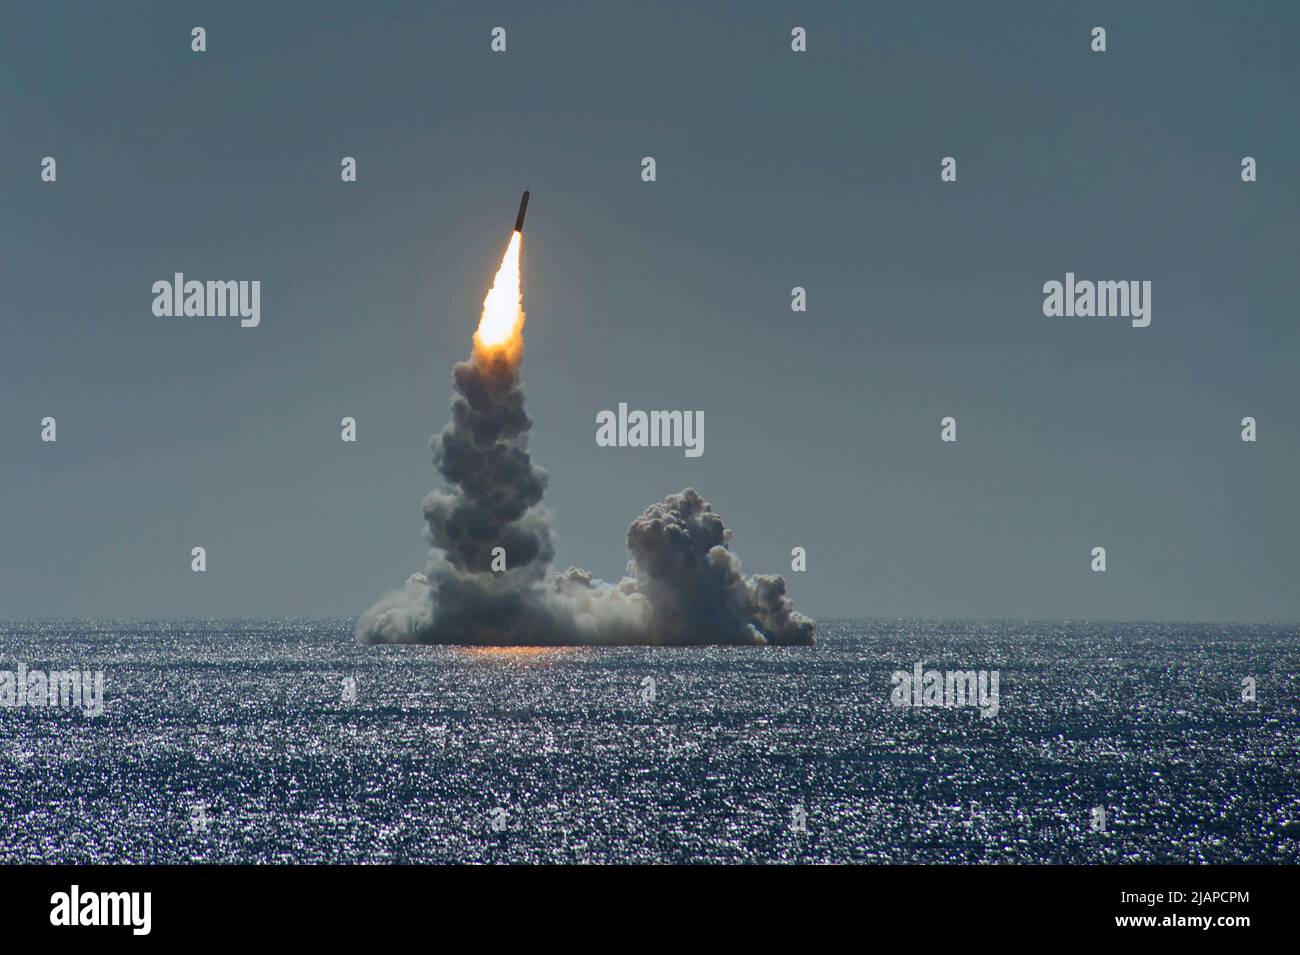 An unarmed Trident II (D5LE) missile launches from Ohio-class ballistic missile submarine USS Maine (SSBN 741) off the coast of California, February 2020. The test launch was part of the U.S. Navy Strategic Systems ProgramsÕ demonstration and shakedown operation certification process. The successful launch demonstrated the readiness of the SSBNÕs strategic weapon system and crew following the submarineÕs engineered refuelling overhaul.   Optimised version of a U.S. Navy photo. Credit US Navy/T.Gooley Stock Photo